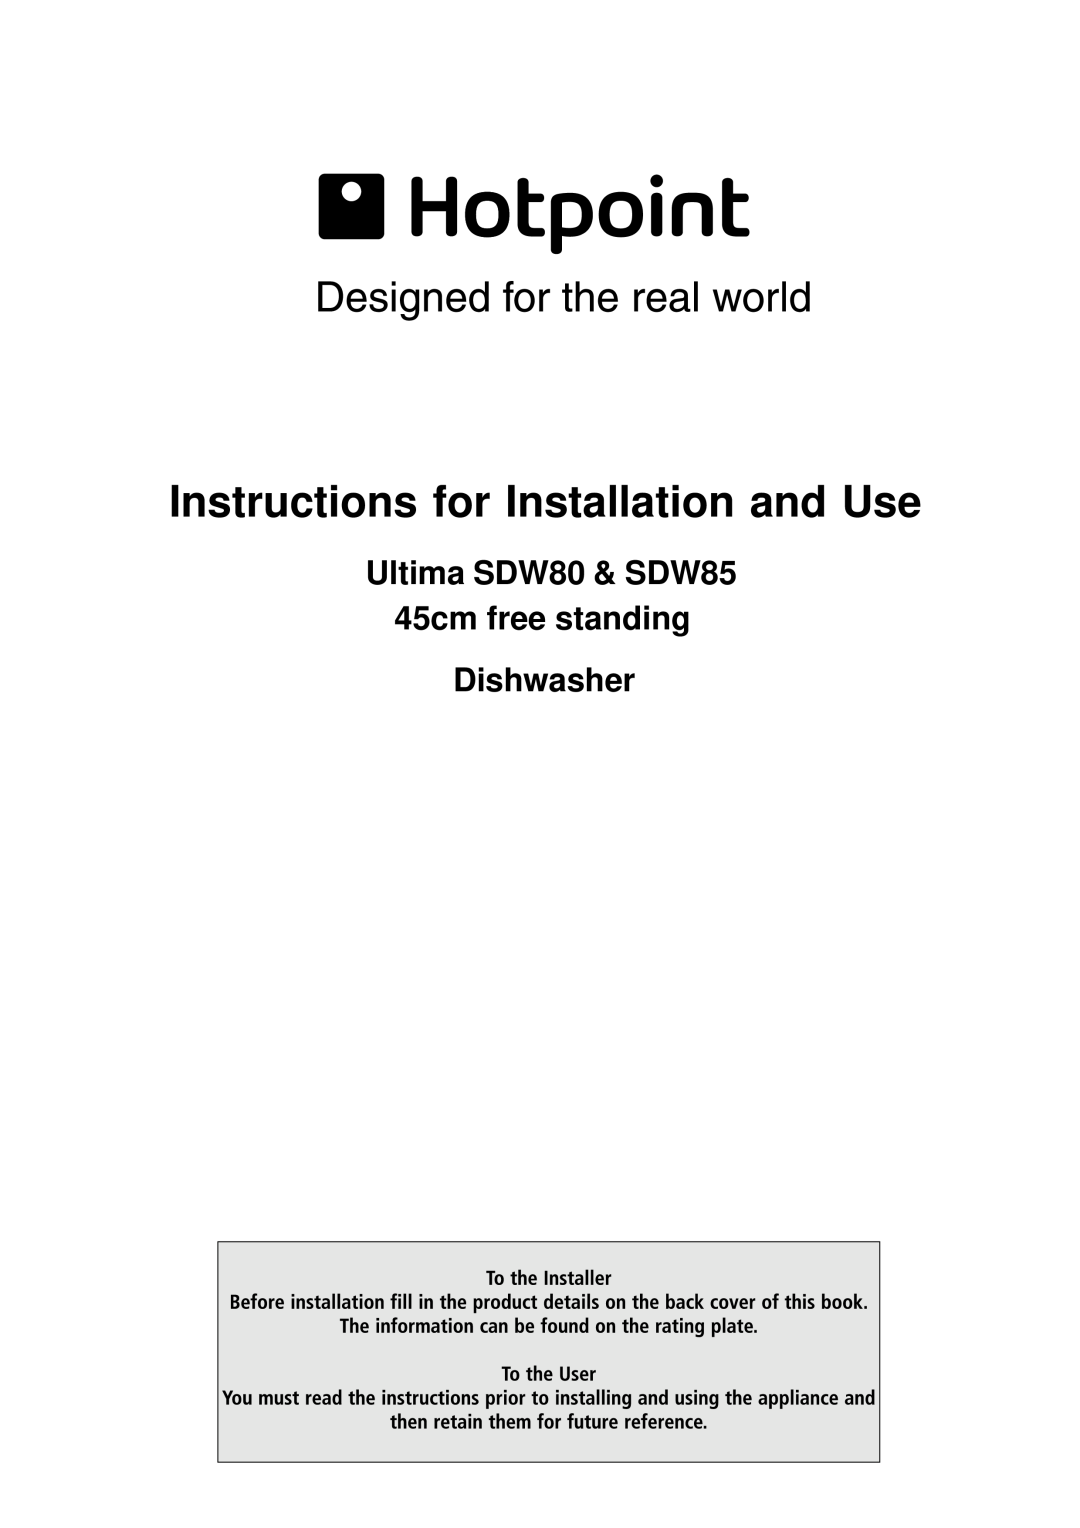 Hotpoint manual Instructions for Installation and Use, Ultima SDW80 & SDW85 45cm free standing, Dishwasher 